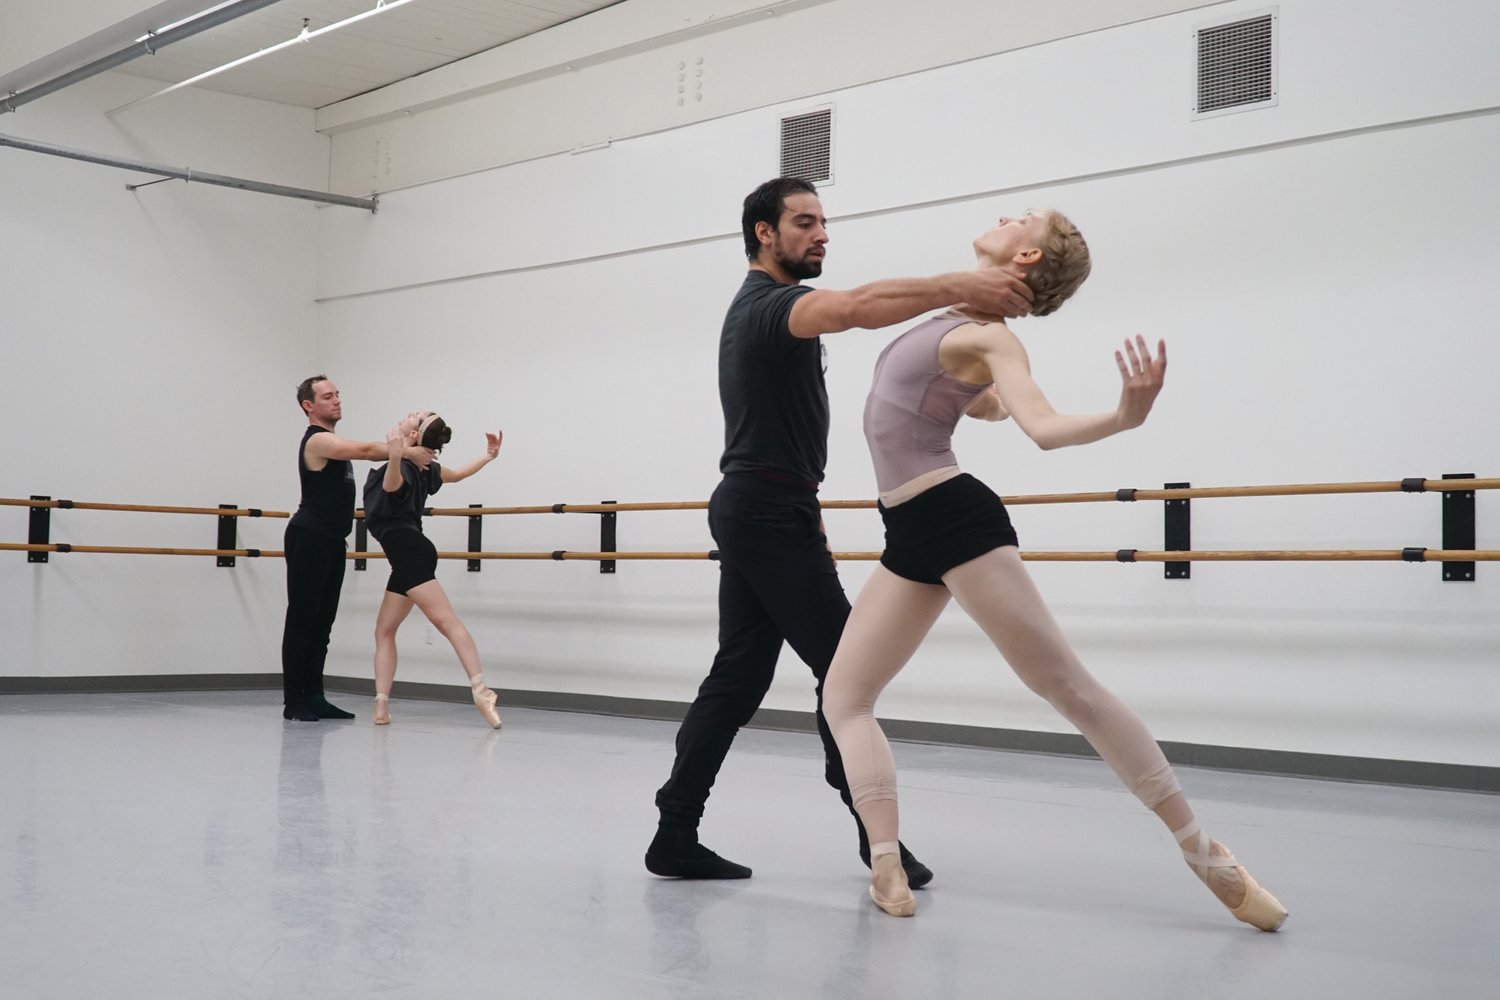 RETURNING TO THE STAGE: From left, Alex Lantz, Anna Lisa Wilkins, Mamuka Kikalishvili and Katherine Bickford will be part of Festival Ballet Providence’s performances of “Continuing Points.”